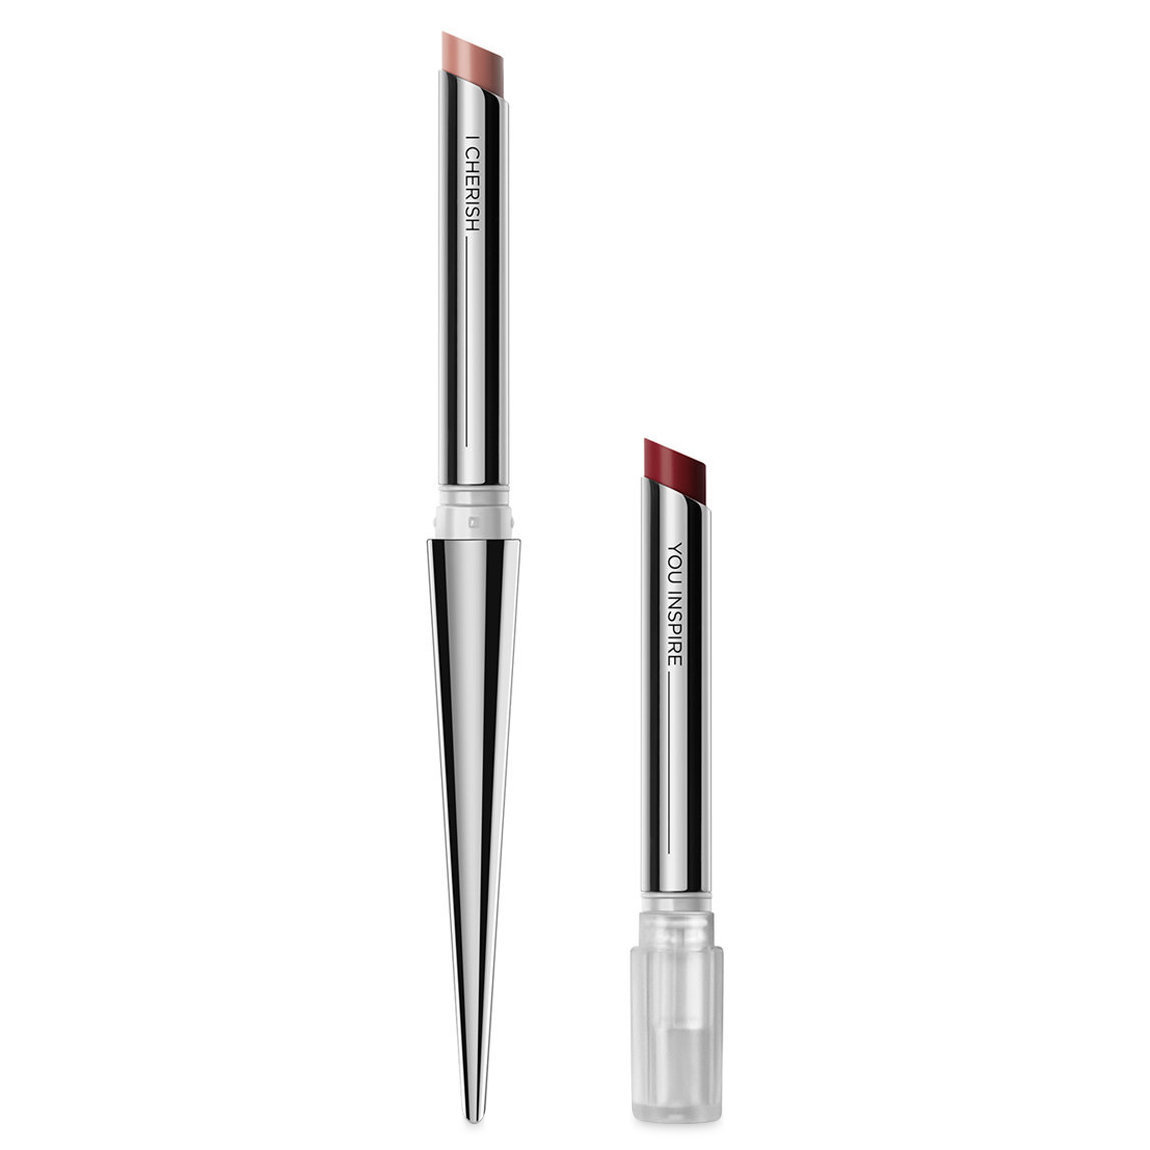 Hourglass Confession Refillable Lipstick Duo - Ghost alternative view 1.